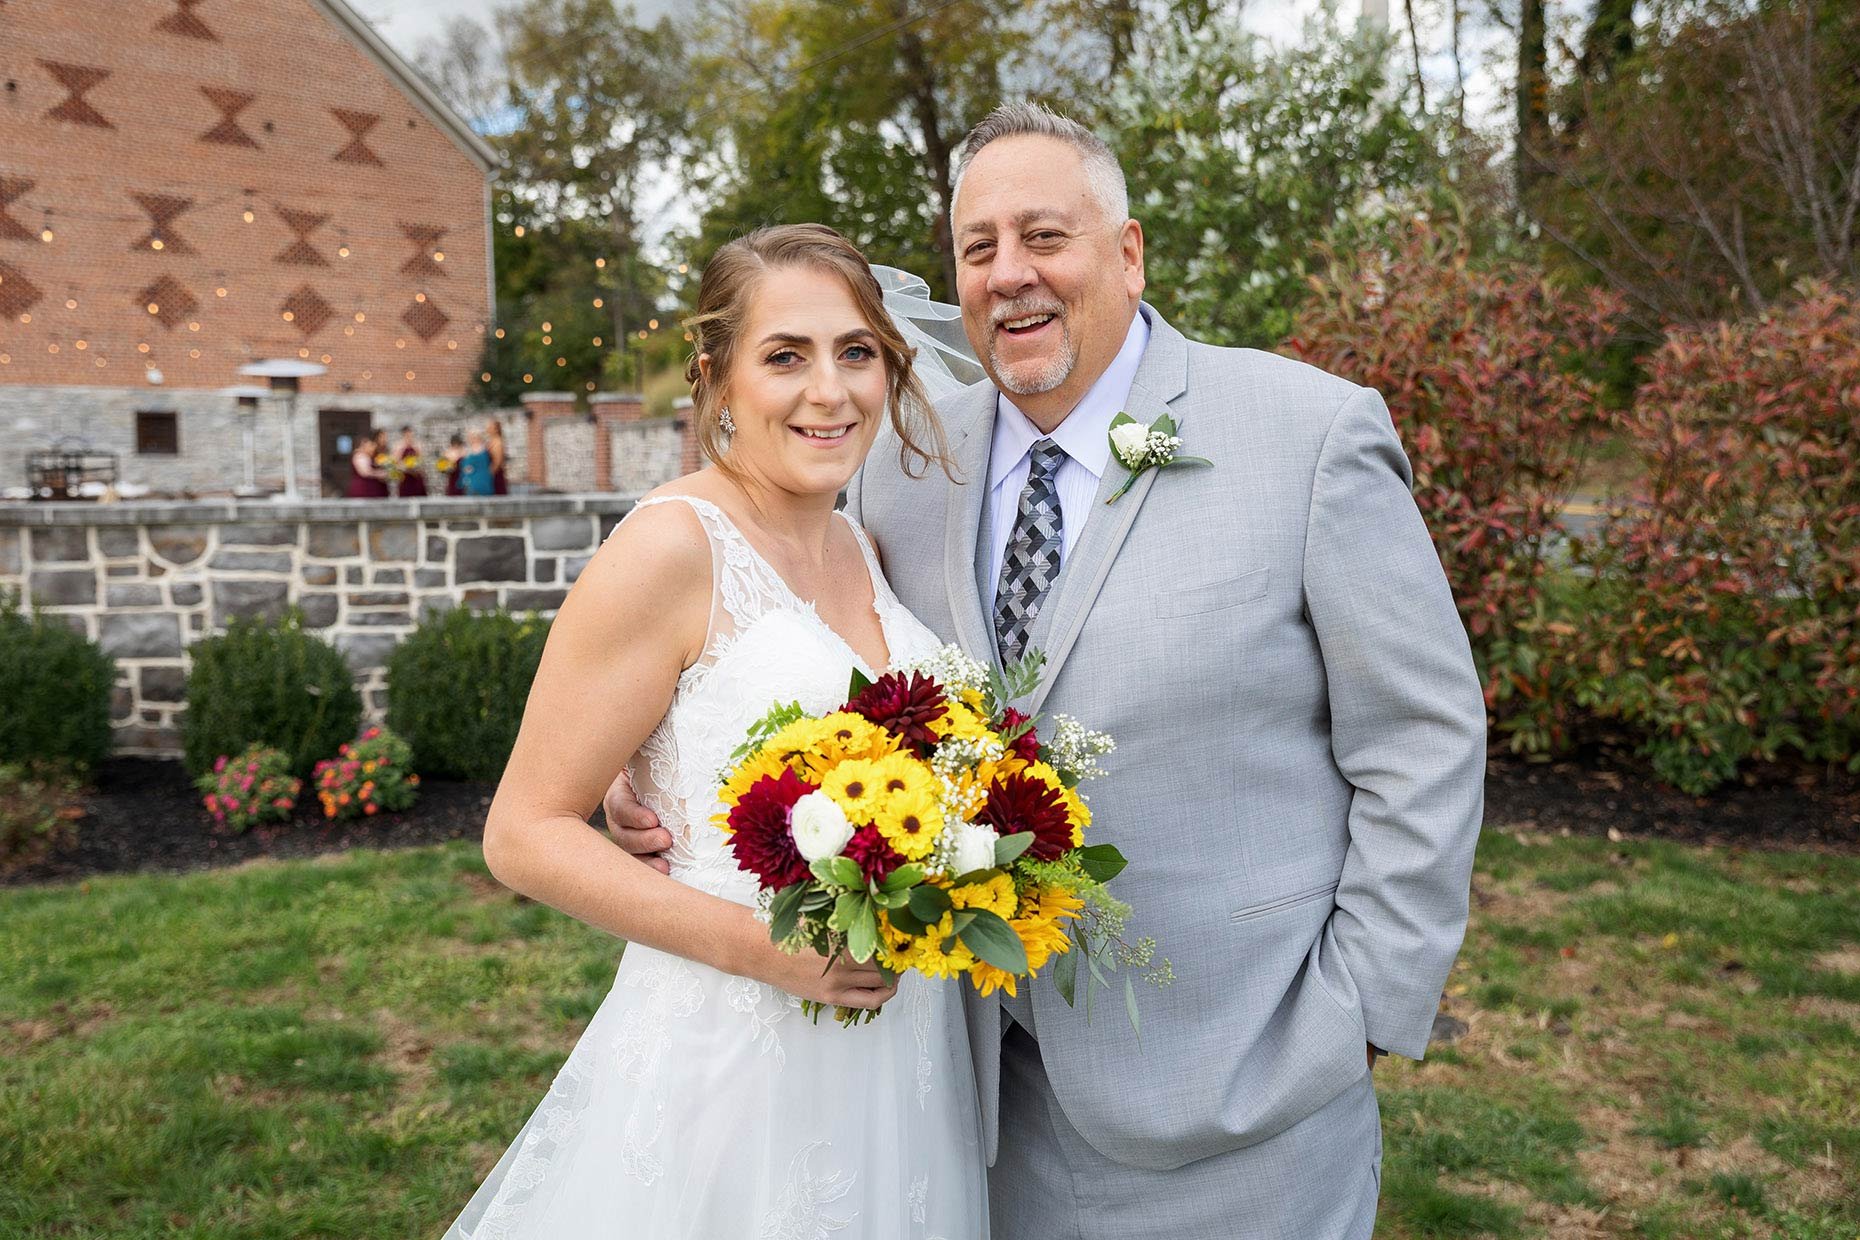 First look with father of the bride